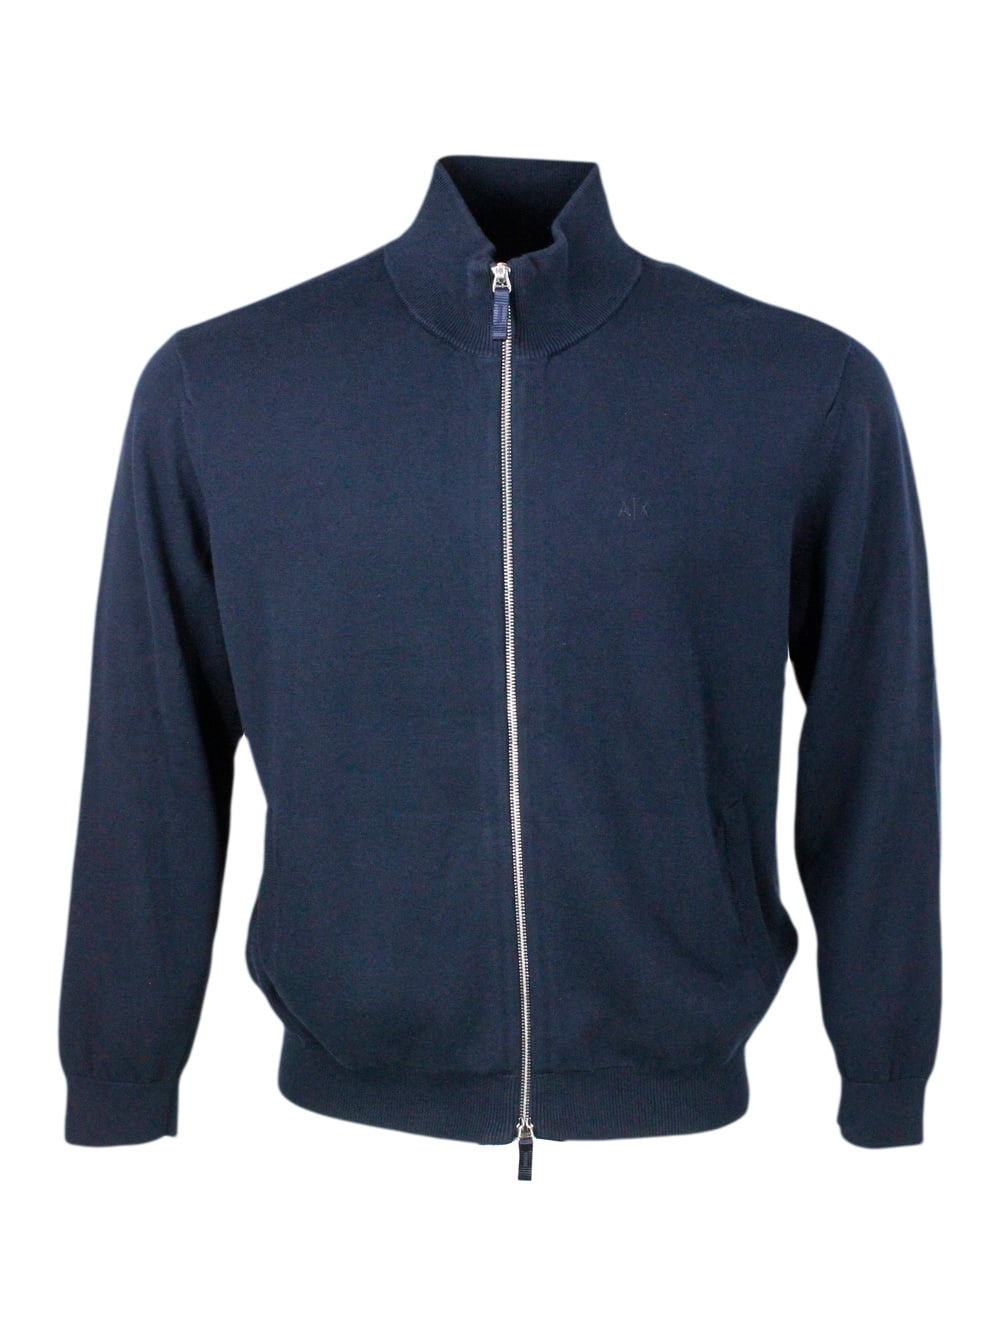 Lightweight Full Zip Long-sleeved Shirt Made Of 100% Cotton With Side Pockets